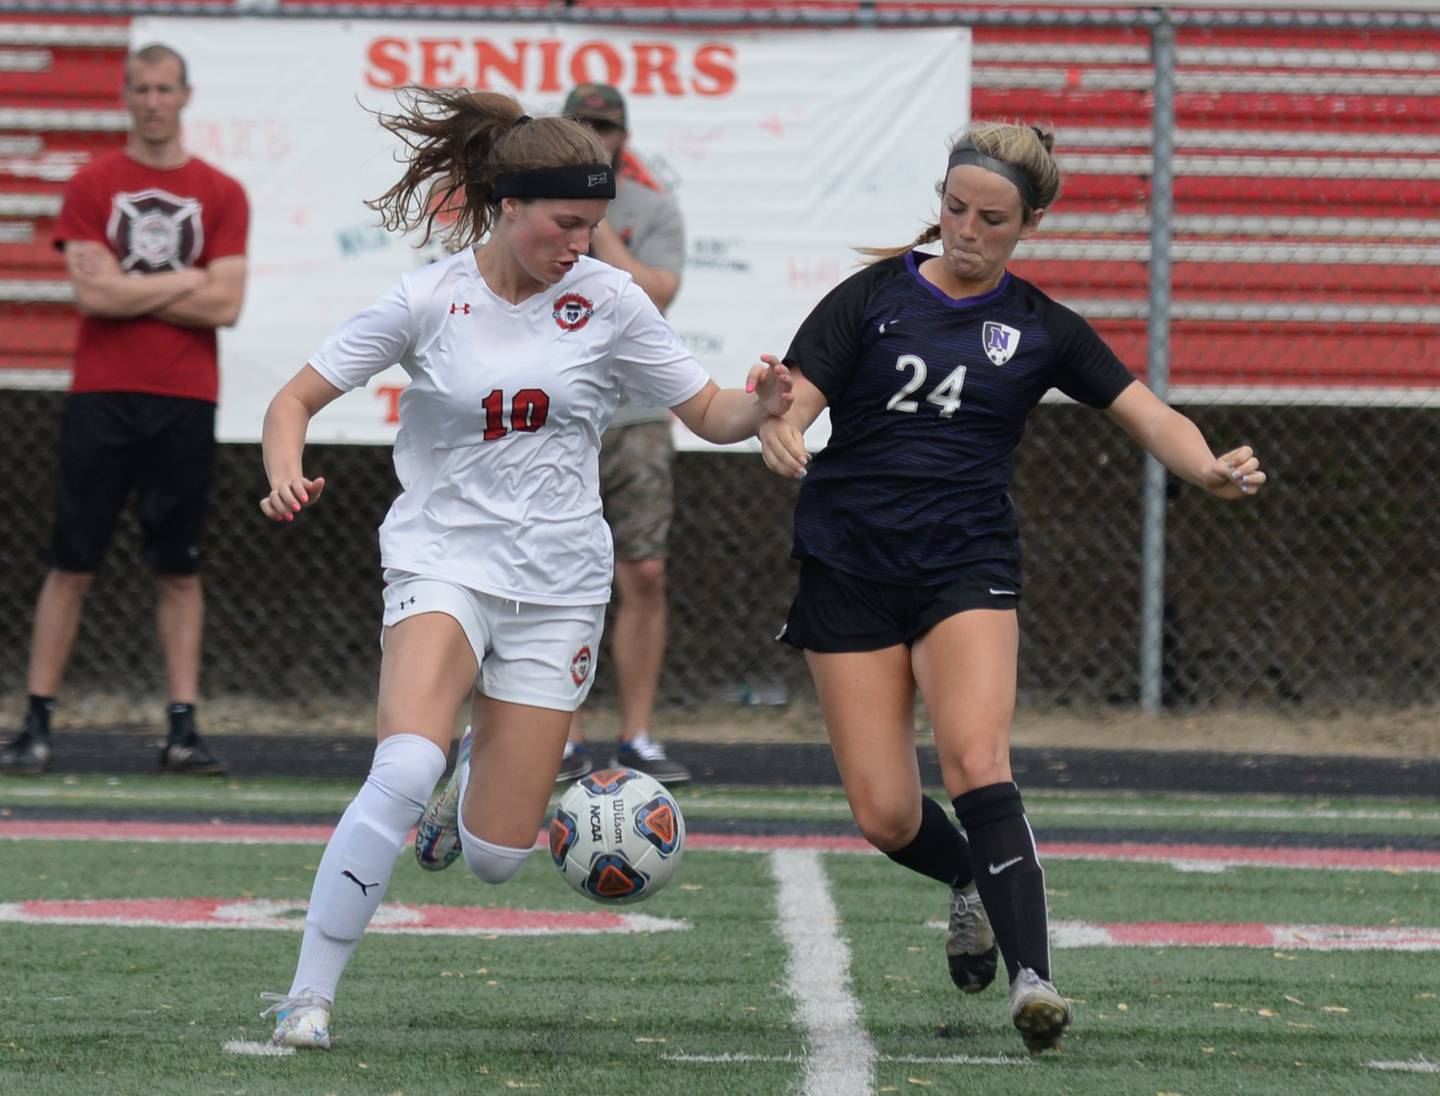 Glenbard East's Sarah Conroy defends the ball against Downers Grove North's Ann Stephens during the regional final game held Friday May 20, 2022.